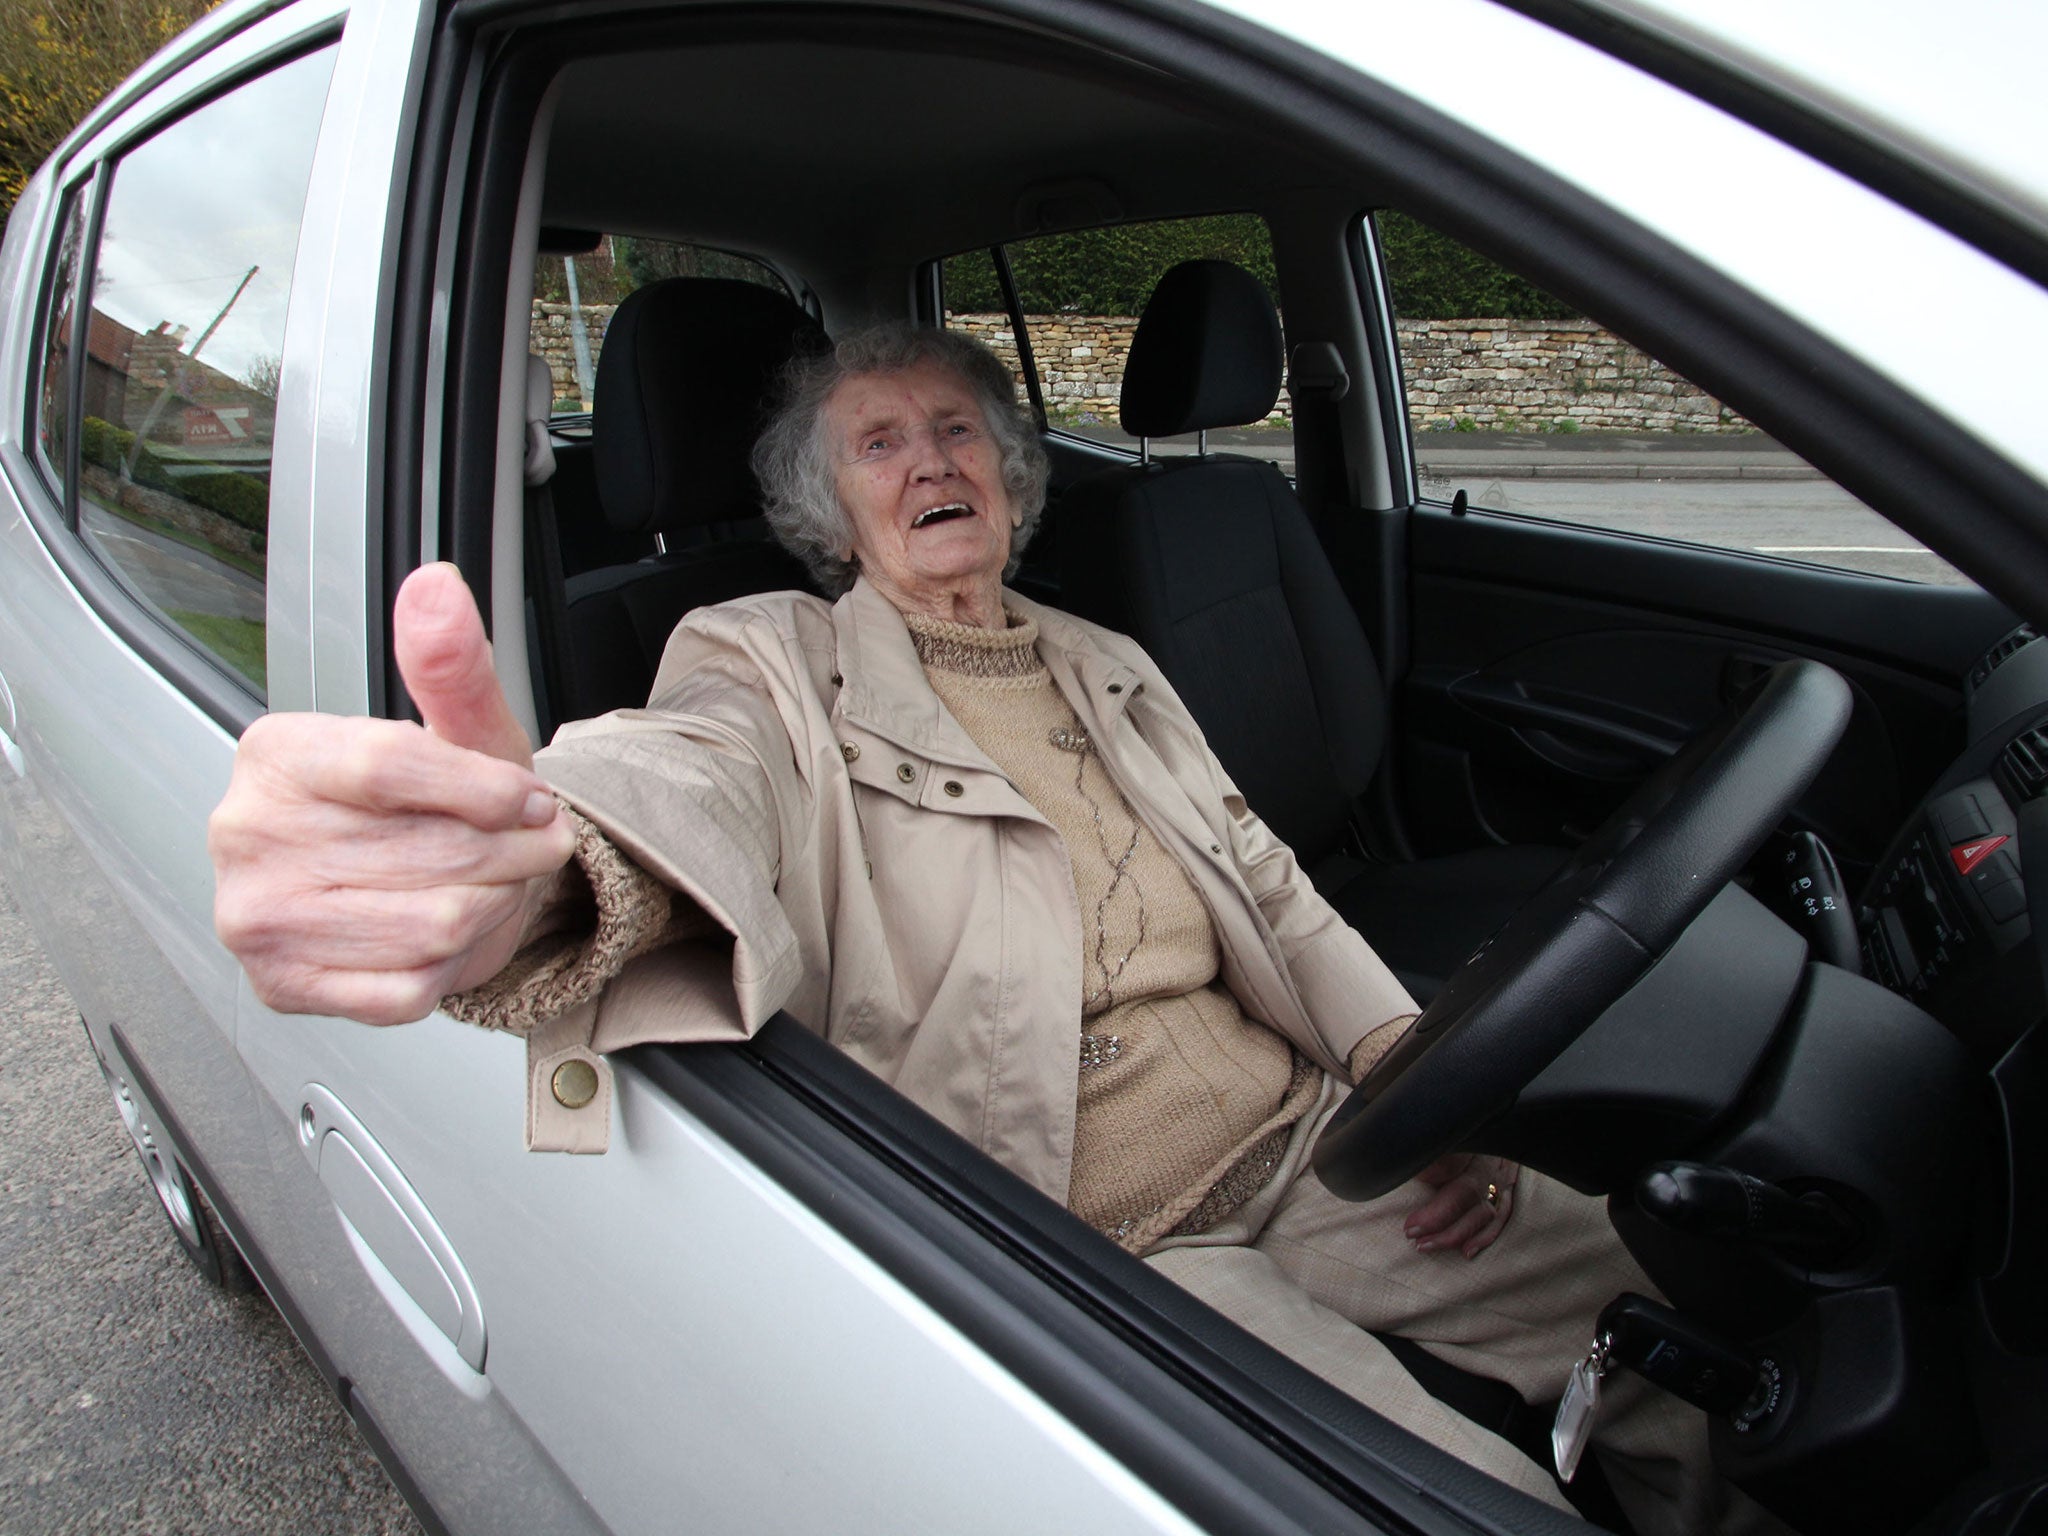 Thumb a ride: Mary Walker featured in ‘100-Year-Old Drivers’